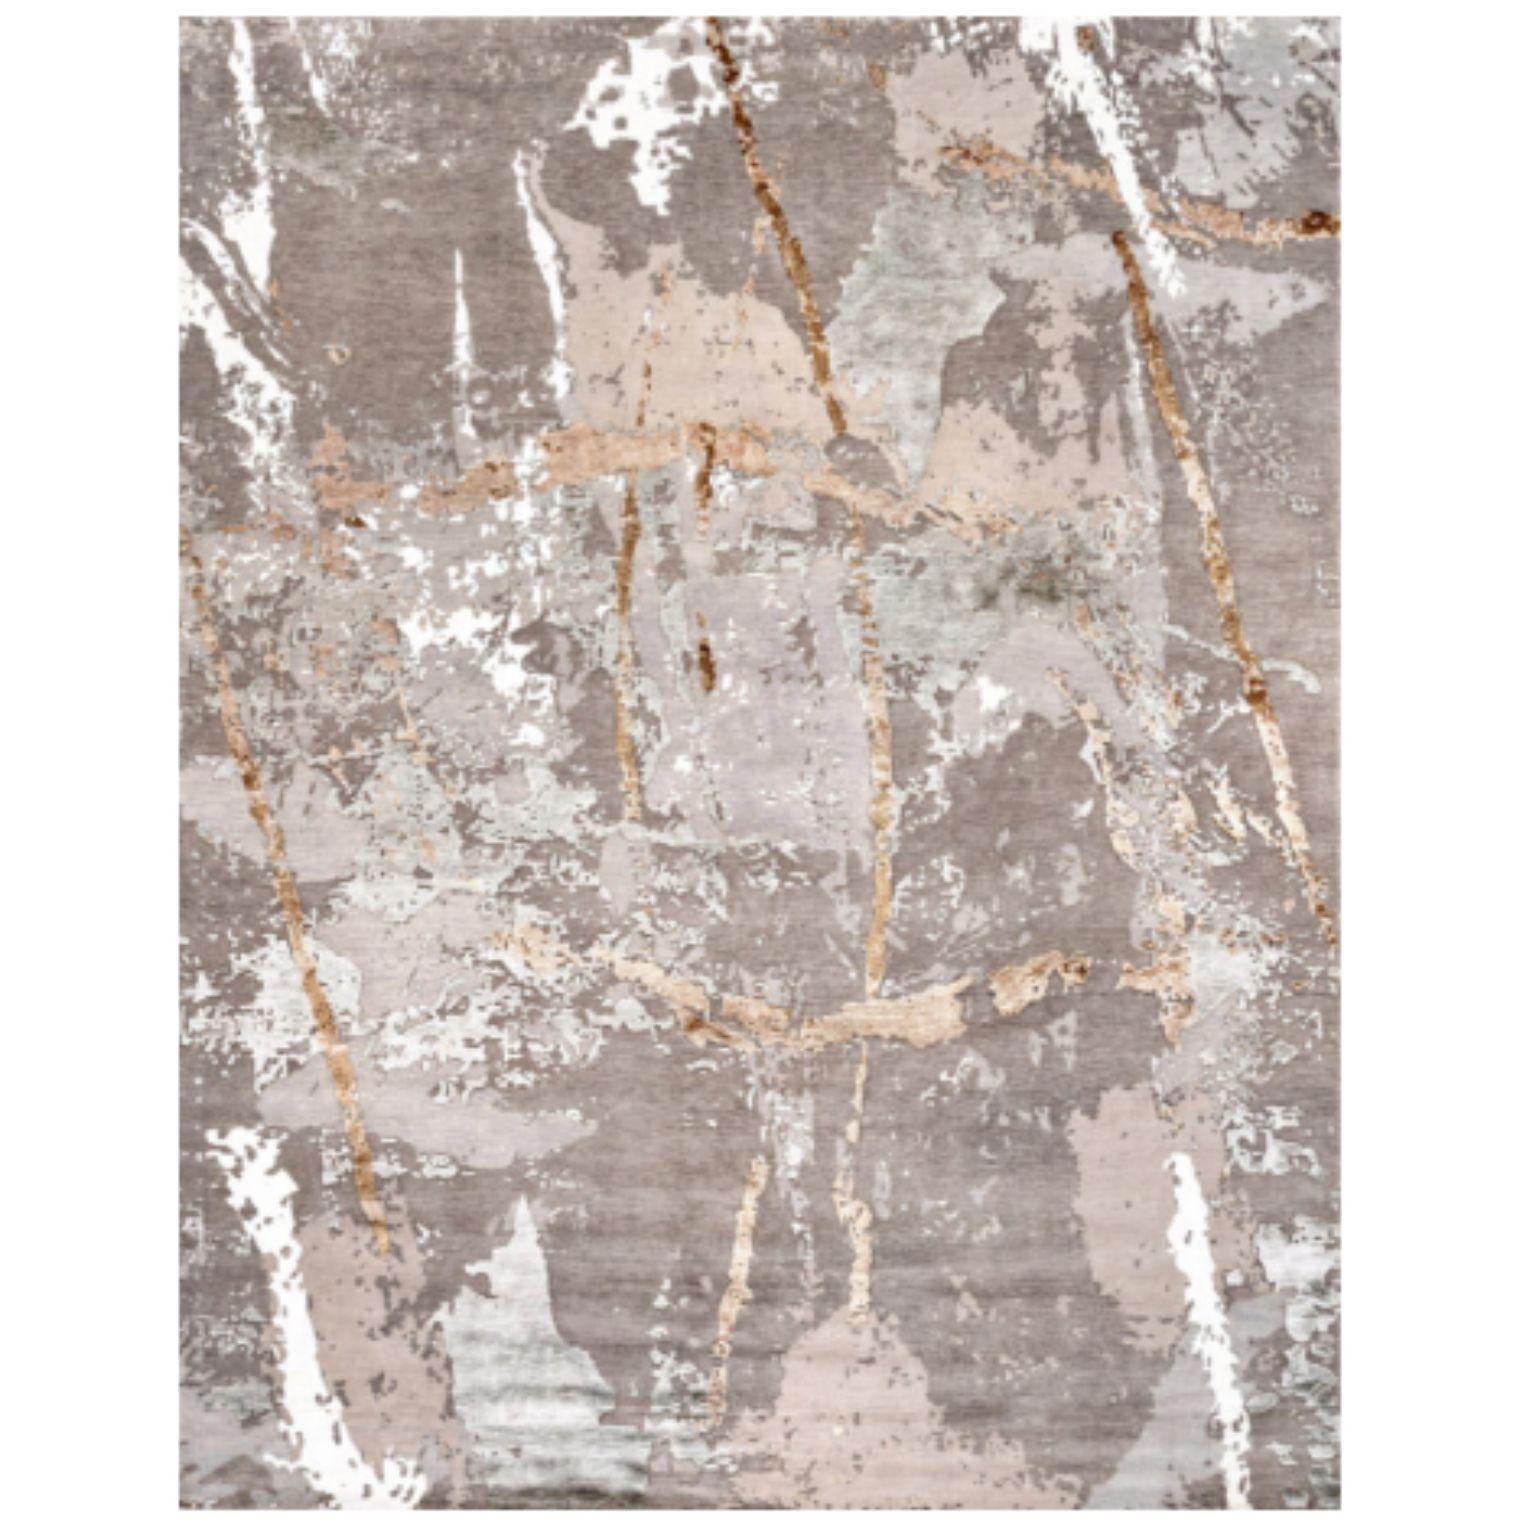 TRAVIS 200 Rug by Illulian
Dimensions: D300 x H200 cm 
Materials: Wool 50% , Silk 50%
Variations available and prices may vary according to materials and sizes. Please contact us.

Illulian, historic and prestigious rug company brand,